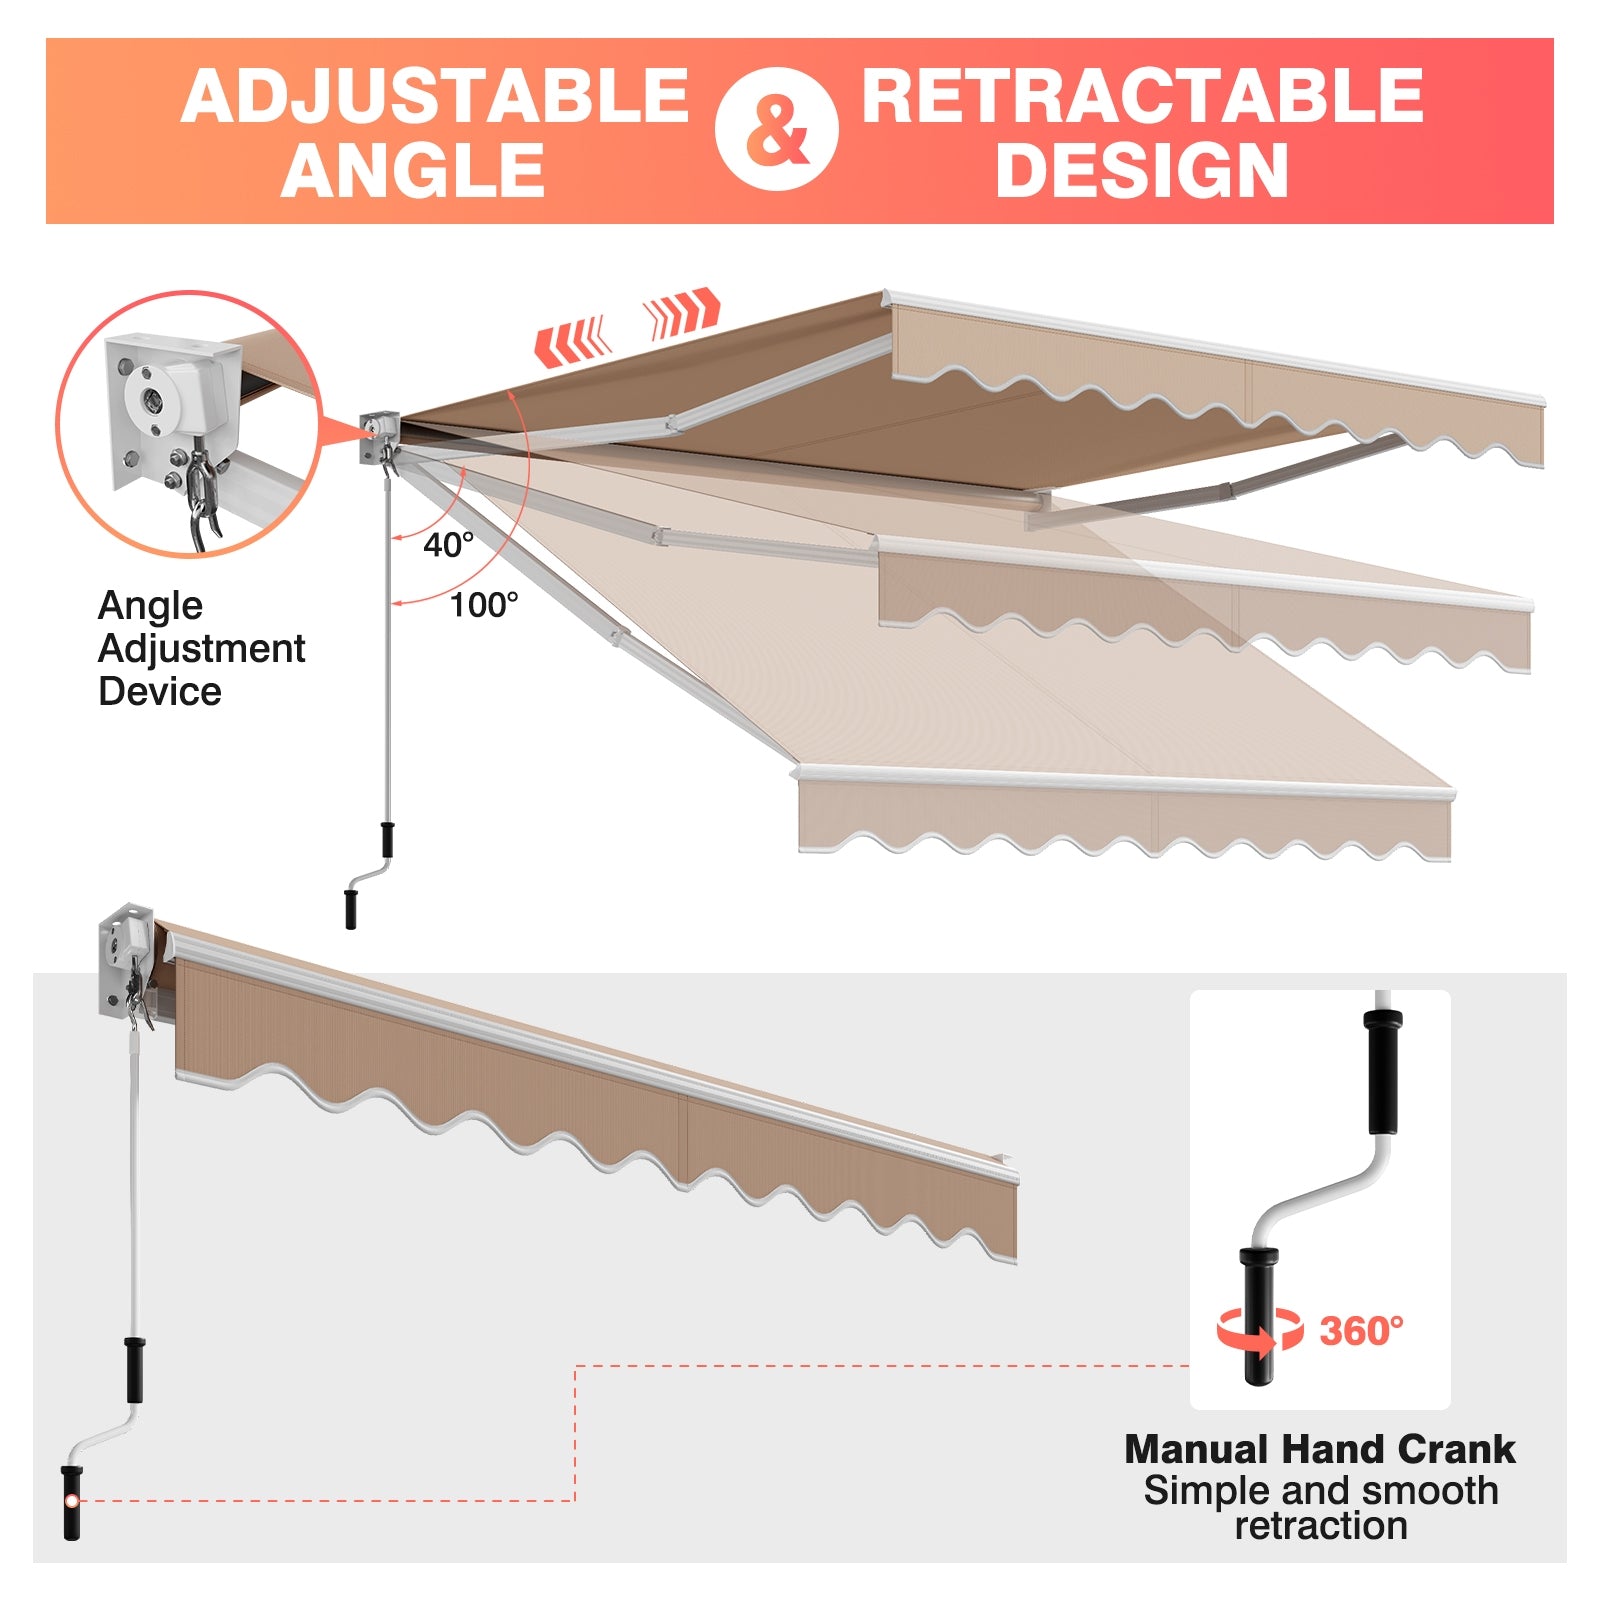 Easy to Operate: The patio canopy can be easily retracted using a manual handle crank for convenience. The height of the extension arm on the telescopic rod can be adjusted by loosening the locking screw, allowing for tilt angle adjustment from 40-100° to provide optimal shading based on sunlight exposure.